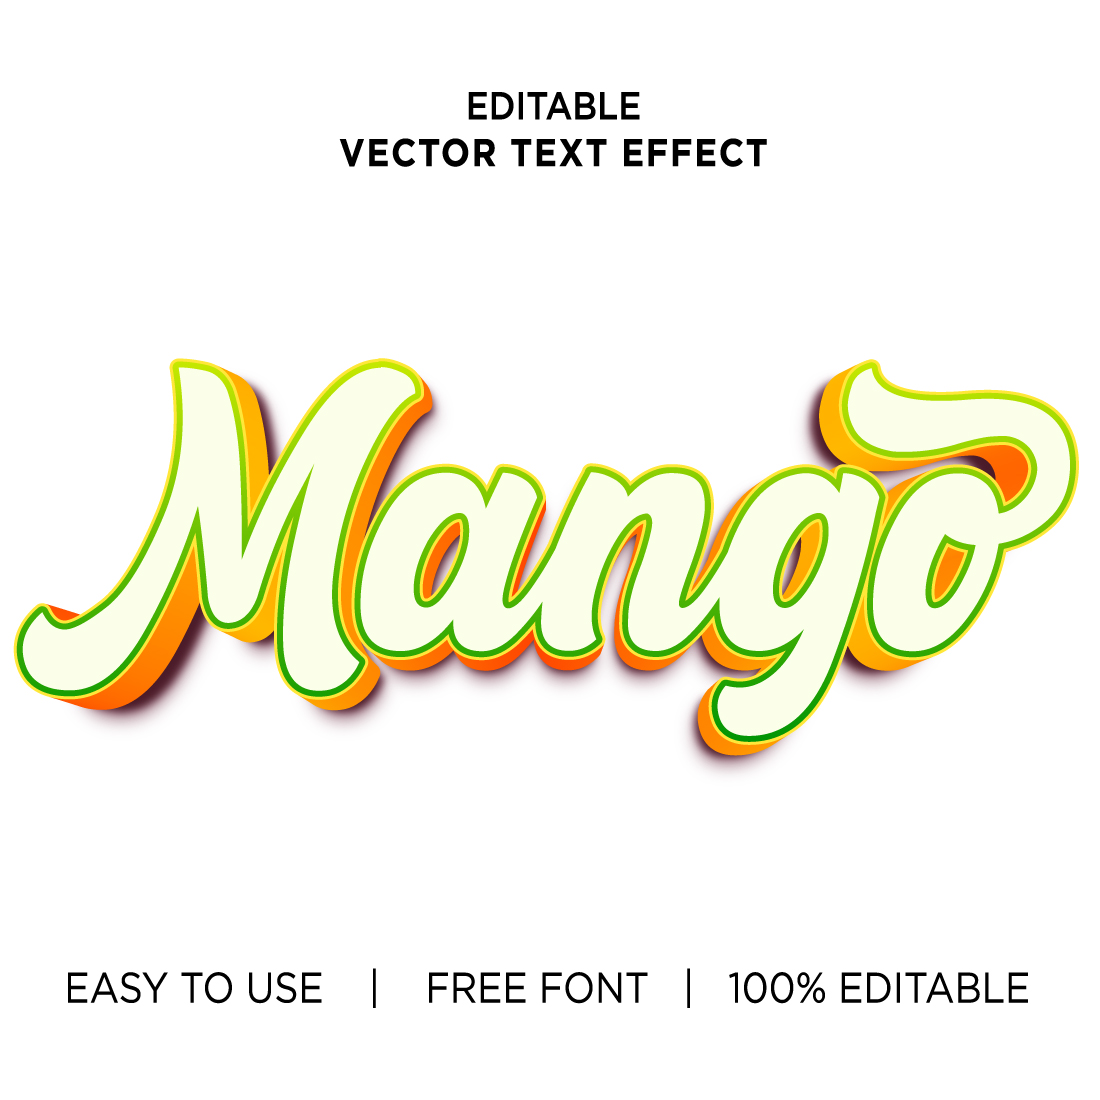 Mango 3d text effects vector illustrations New Text style eps files Editable text effect vector, 3d editable text effect vector, editable font effect vector, text effect vector, preview image.